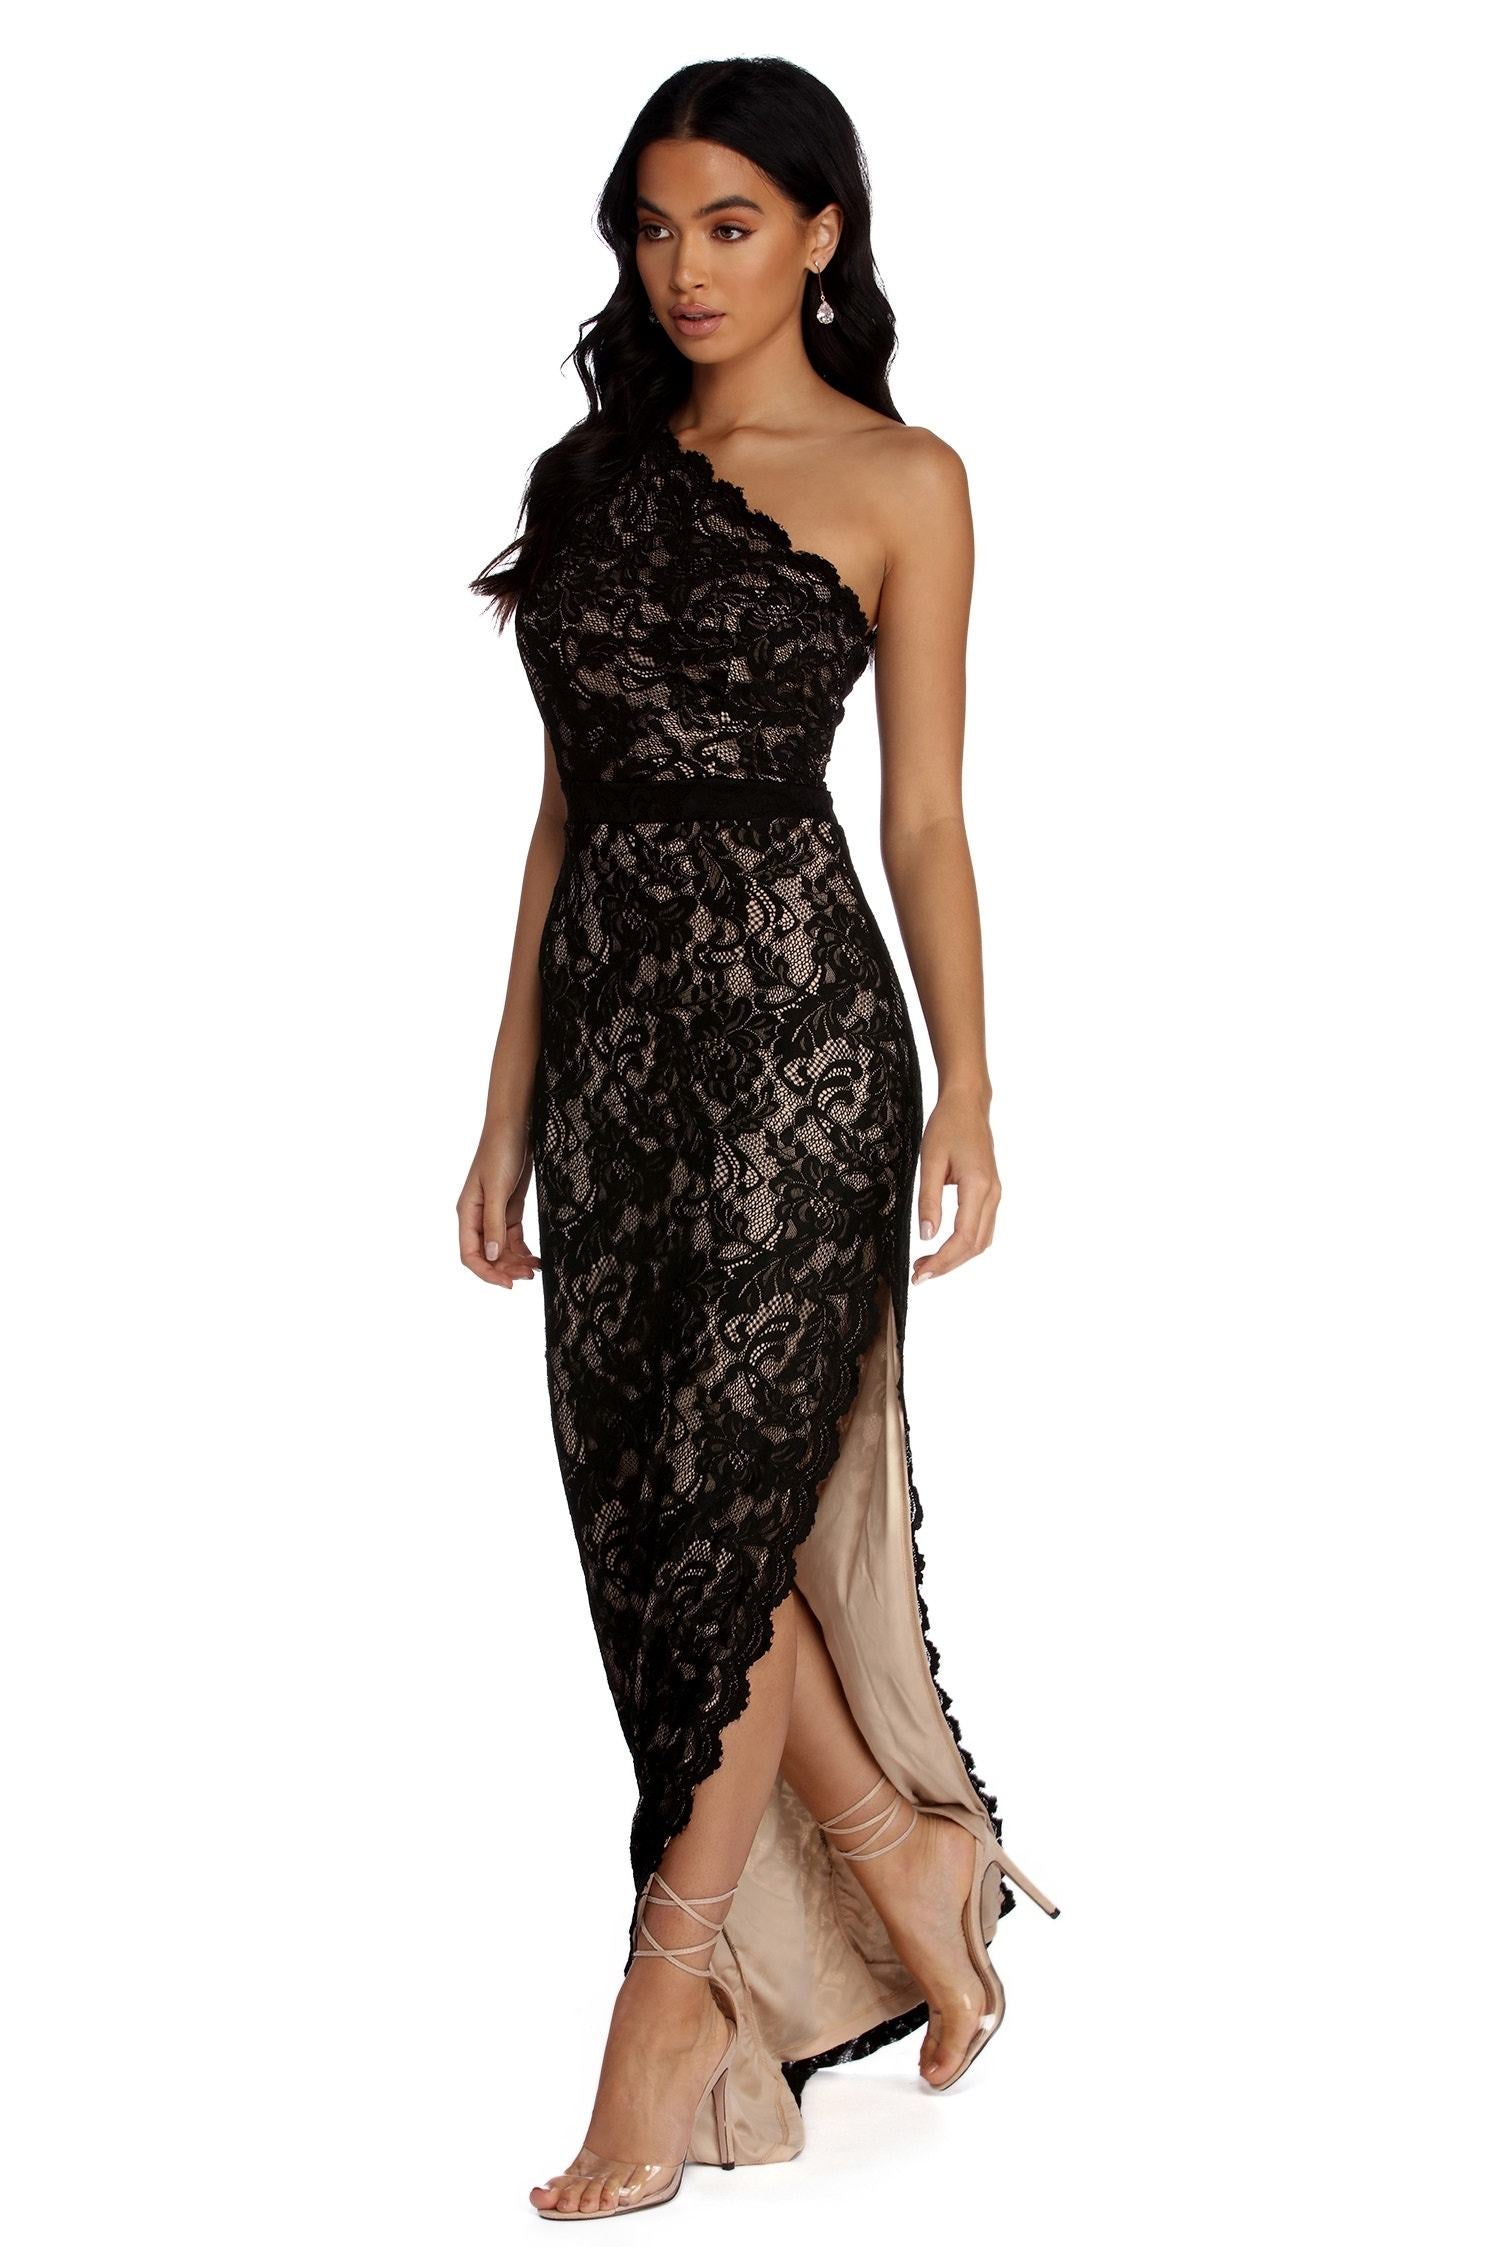 Nina Formal One Shoulder Lace Dress - Lady Occasions